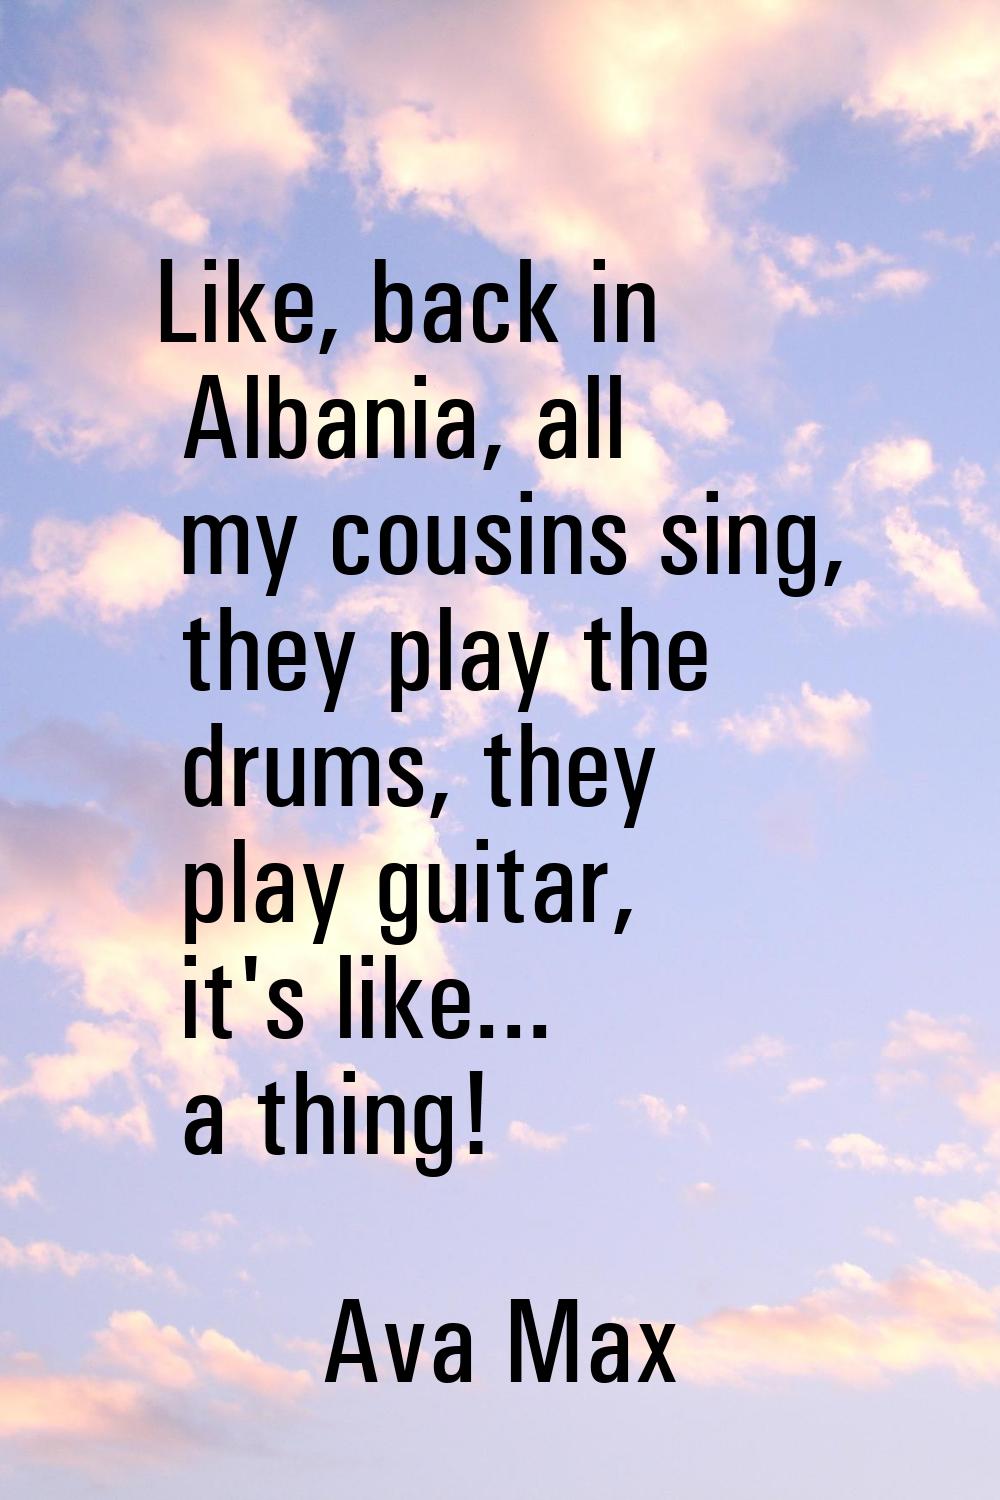 Like, back in Albania, all my cousins sing, they play the drums, they play guitar, it's like... a t